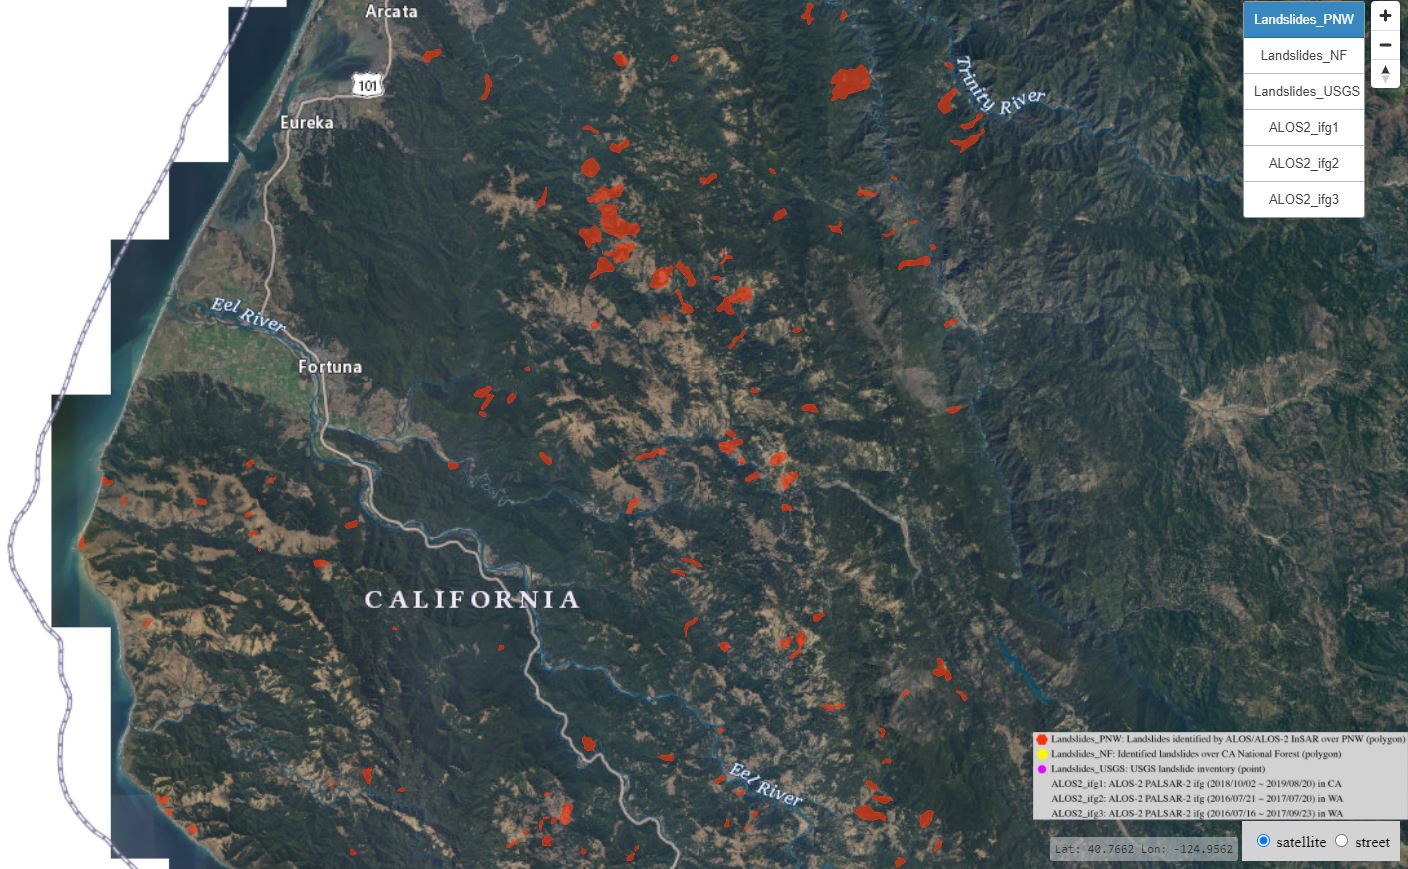 A part of the online InSAR derived landslide inventory for the Pacific Northwest.